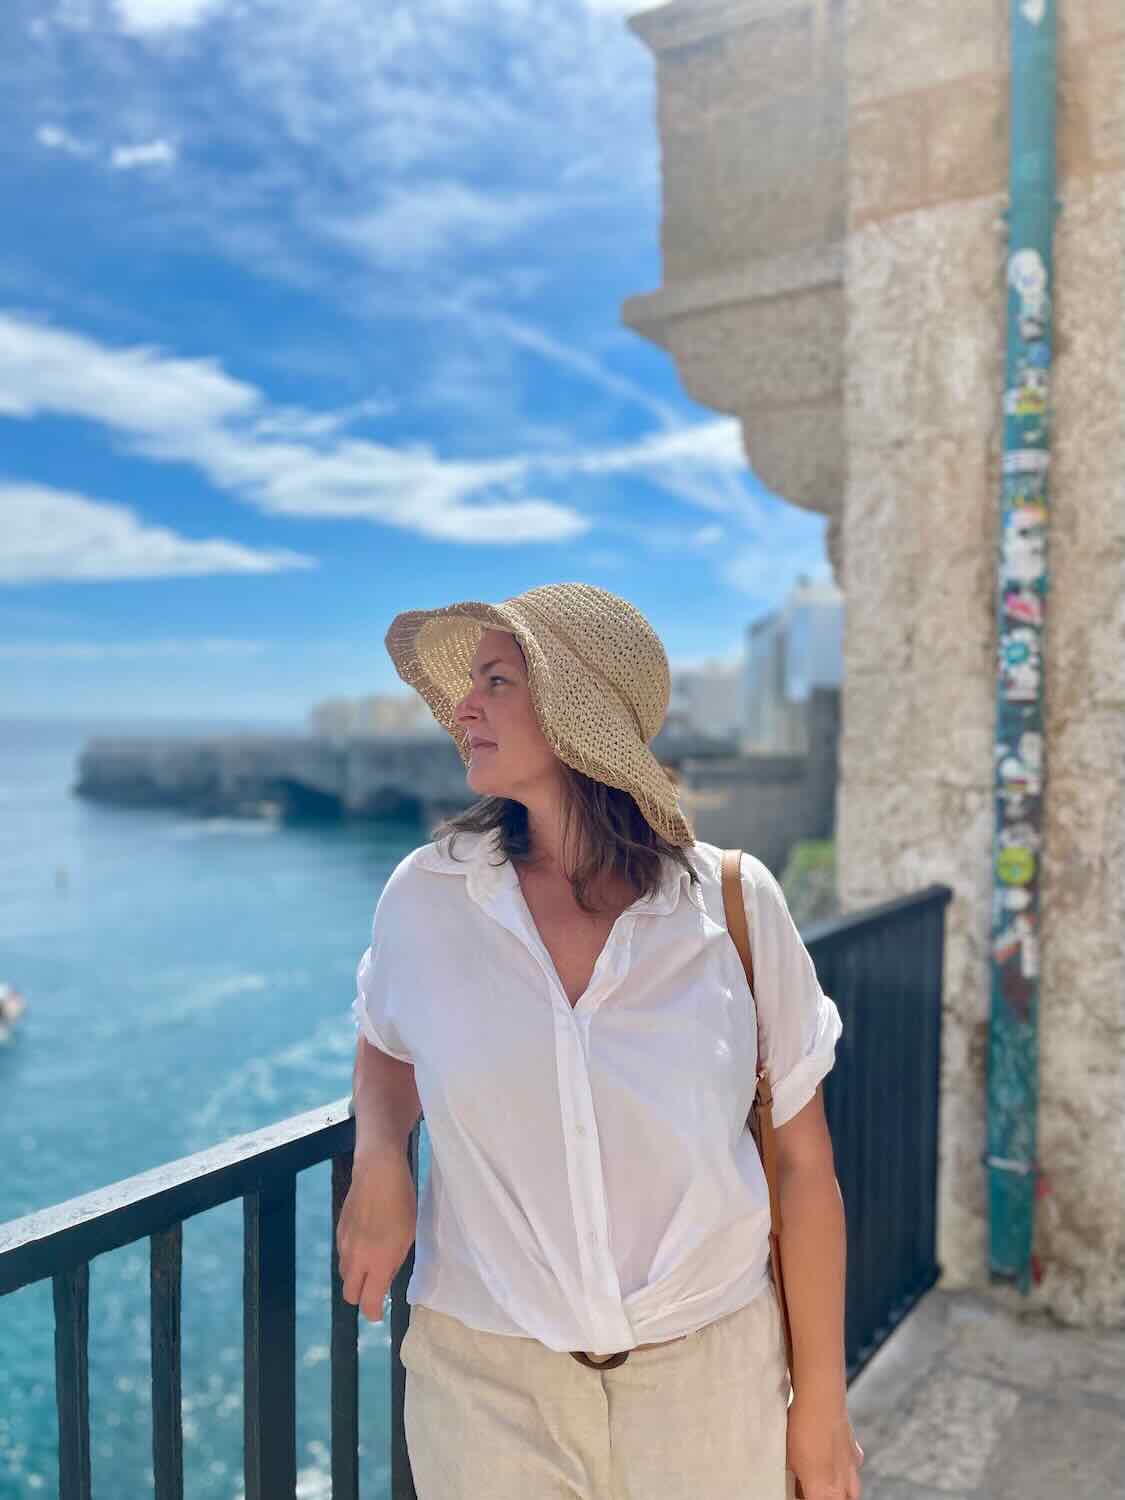 A woman wearing a straw hat and a white shirt stands on a balcony overlooking the sea in Polignano a Mare, Italy. The blue sky and ocean provide a beautiful backdrop as she gazes into the distance.